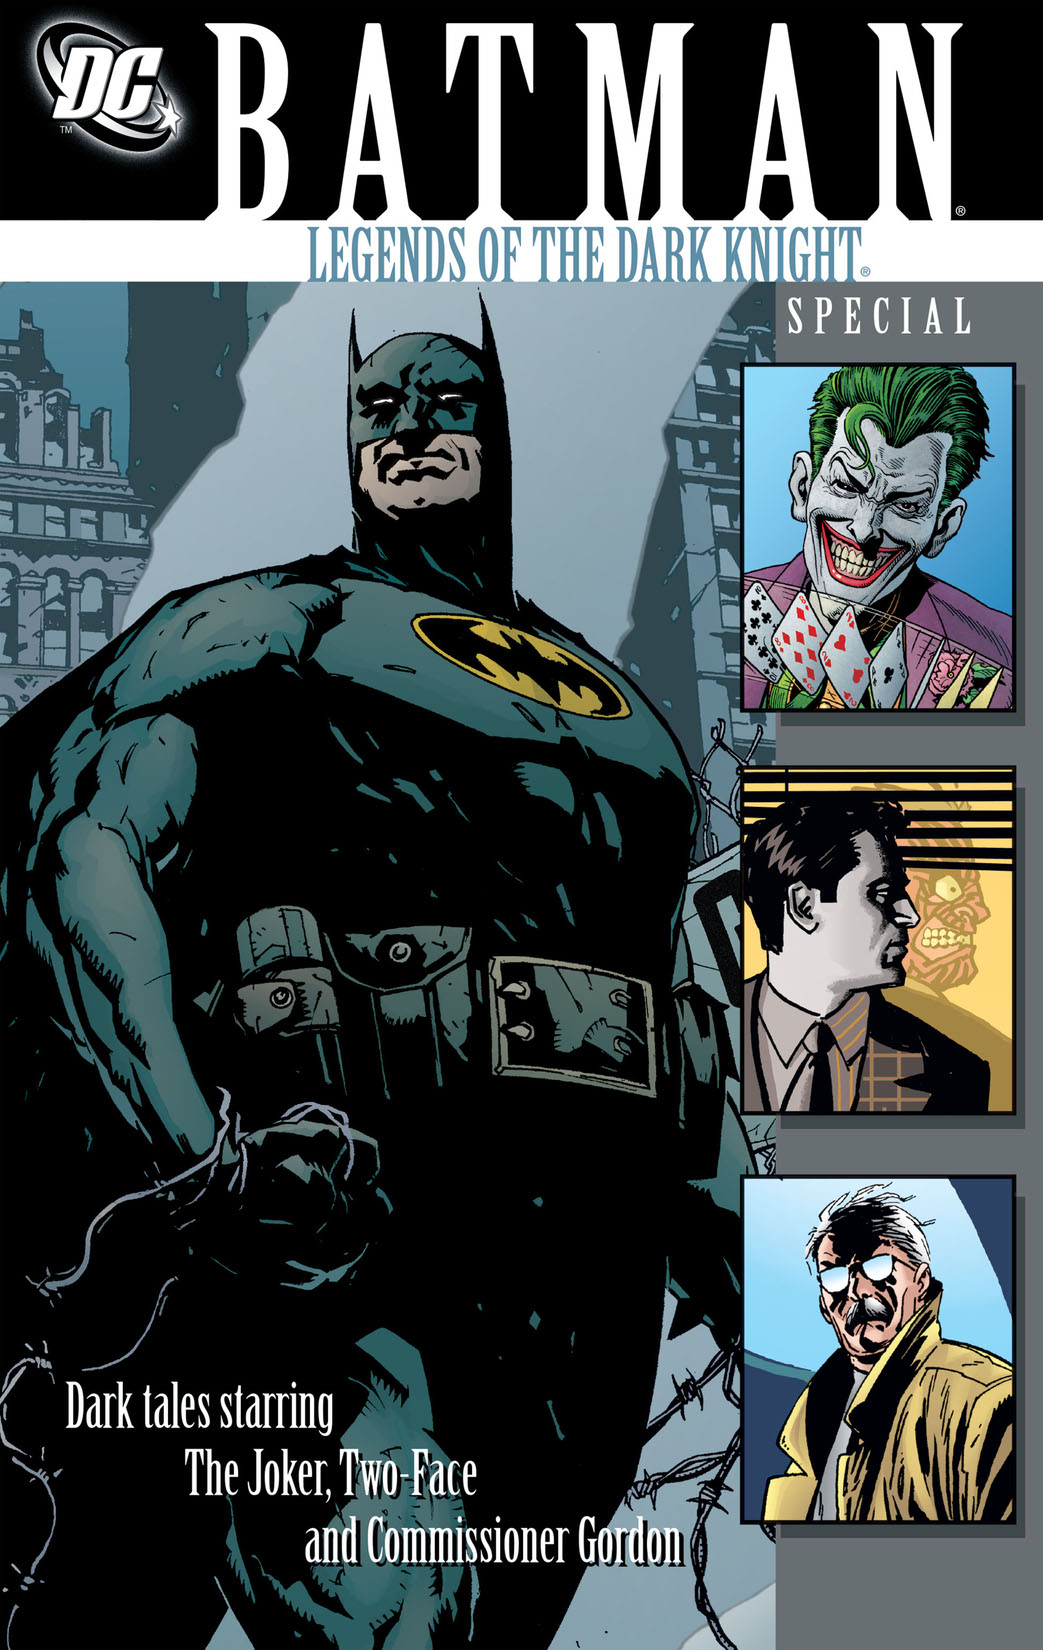 Legends of the Dark Knight Special #1 preview images